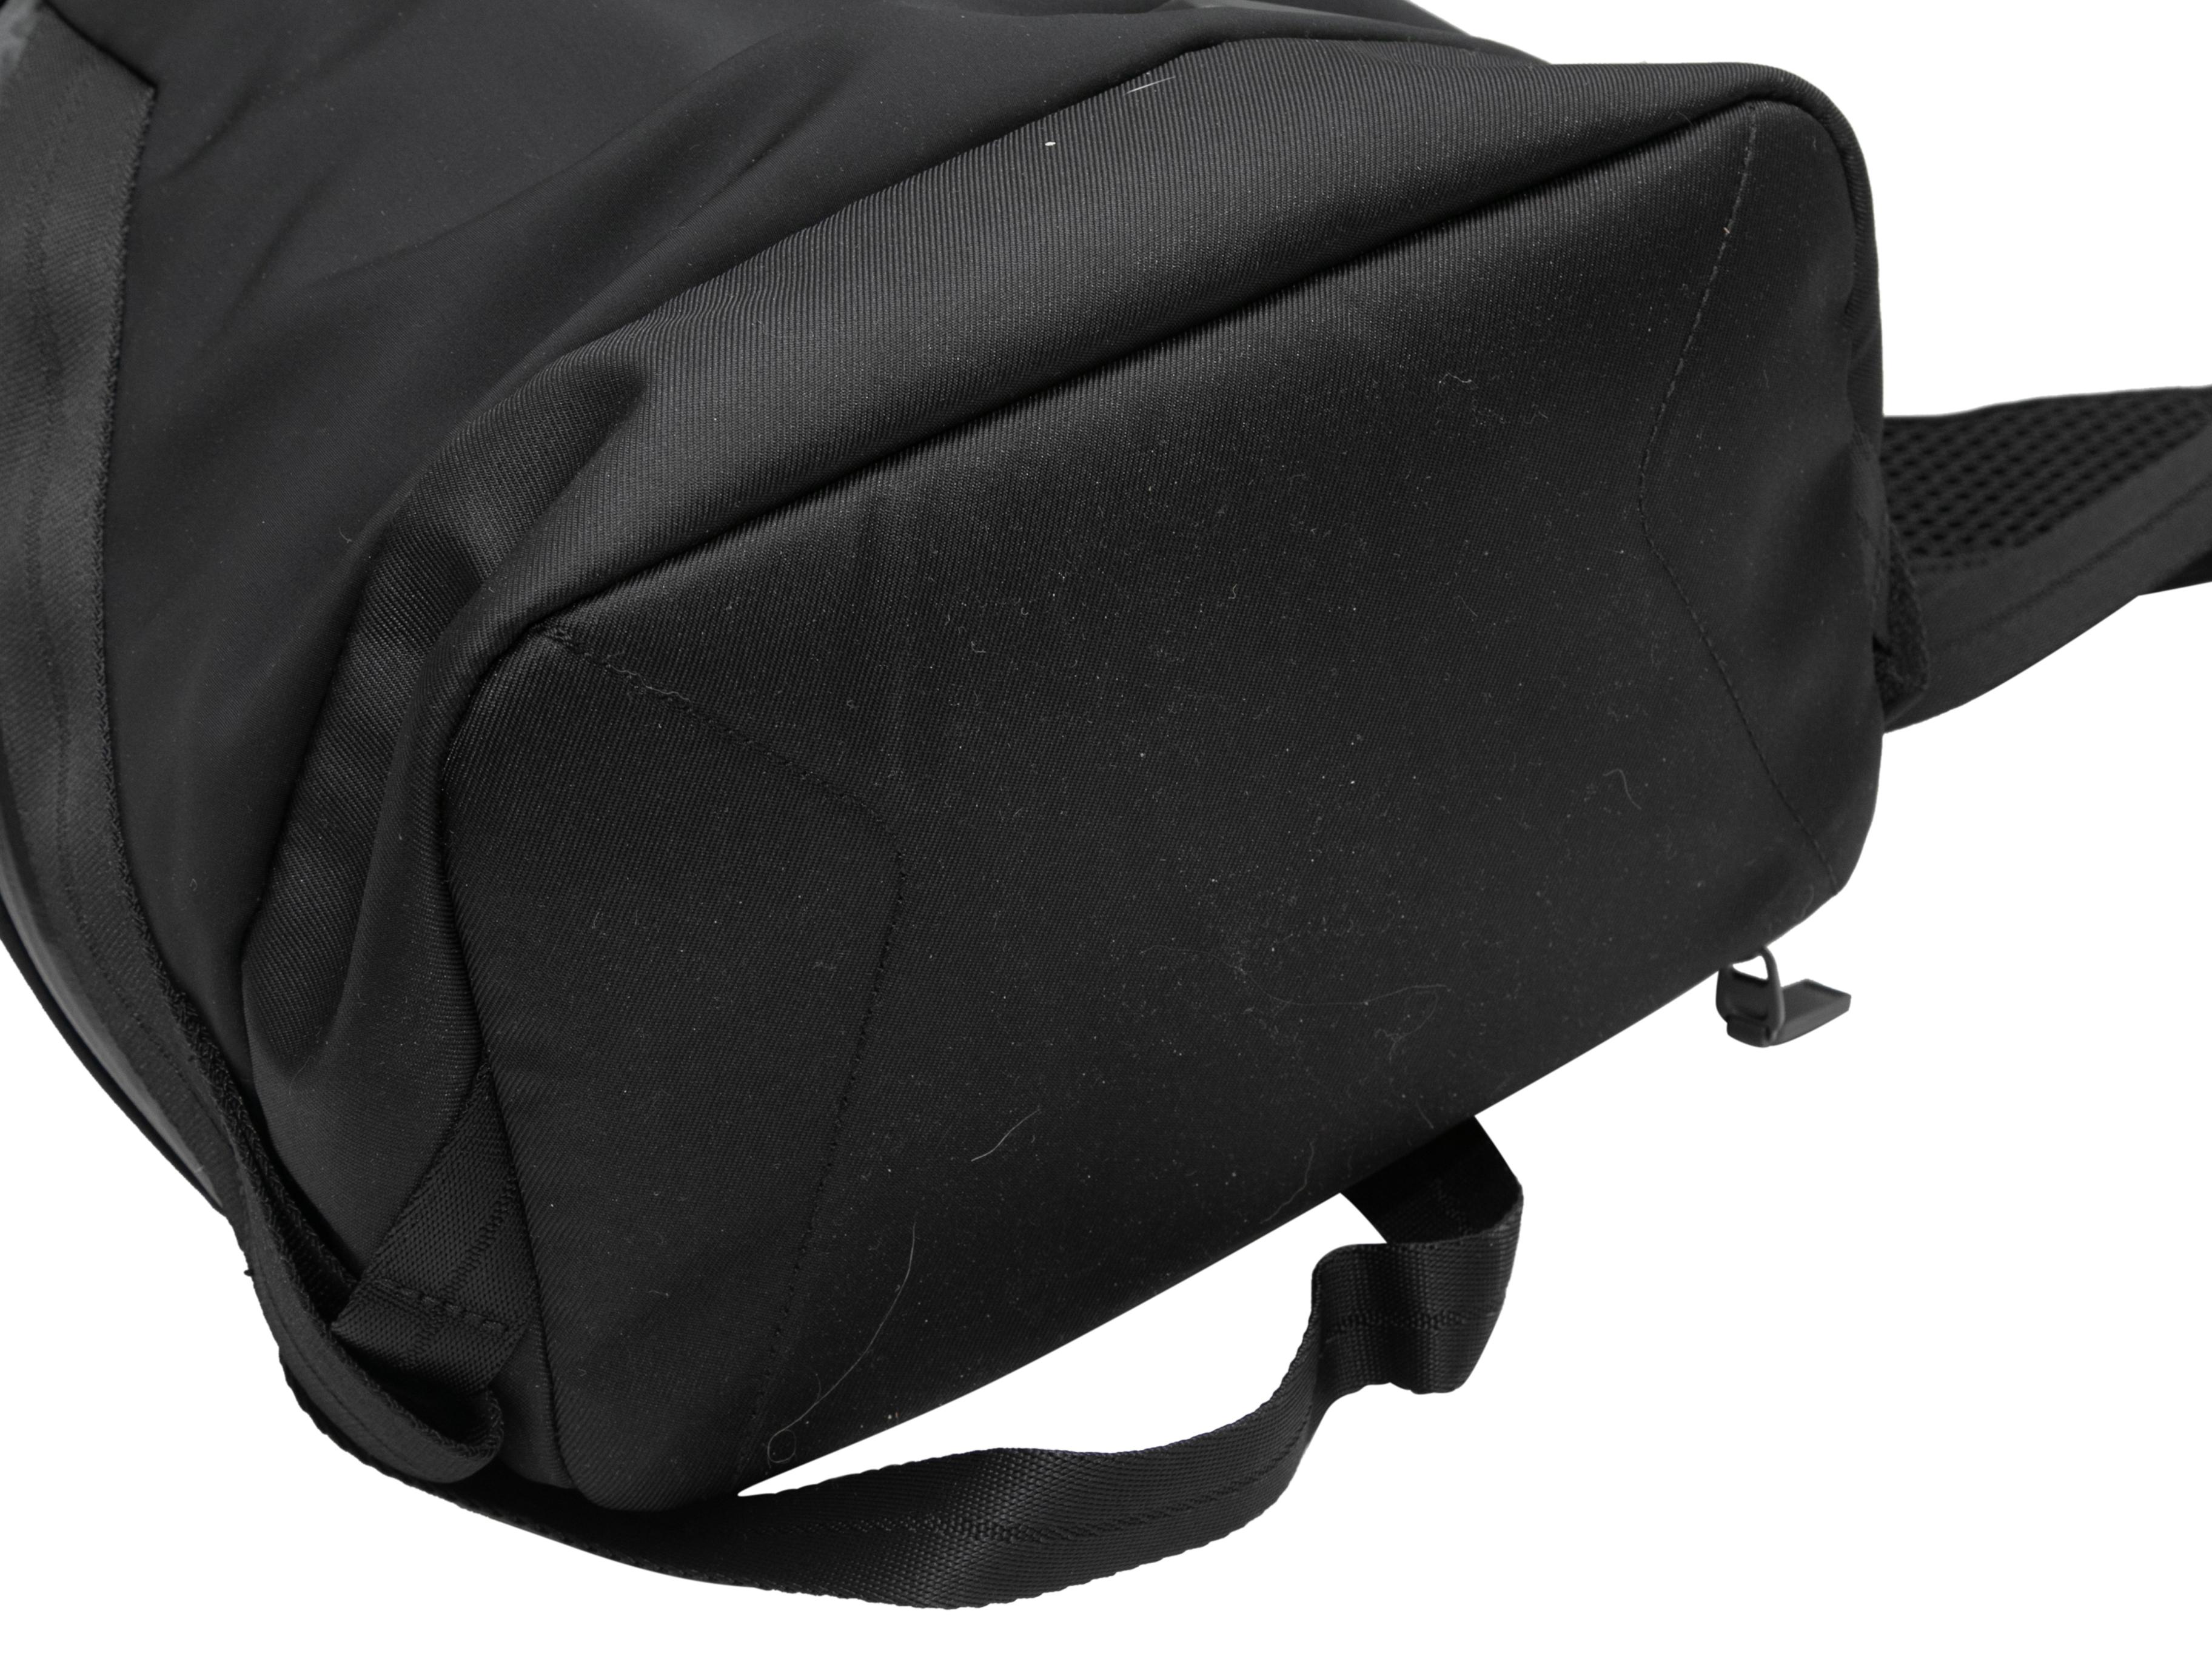 Black Tumi Tahoe Nylon Backpack. The Tahoe backpack features a nylon body, dual front side zip pockets, a padded back, dual adjustable shoulder straps, and a top zip closure. 14